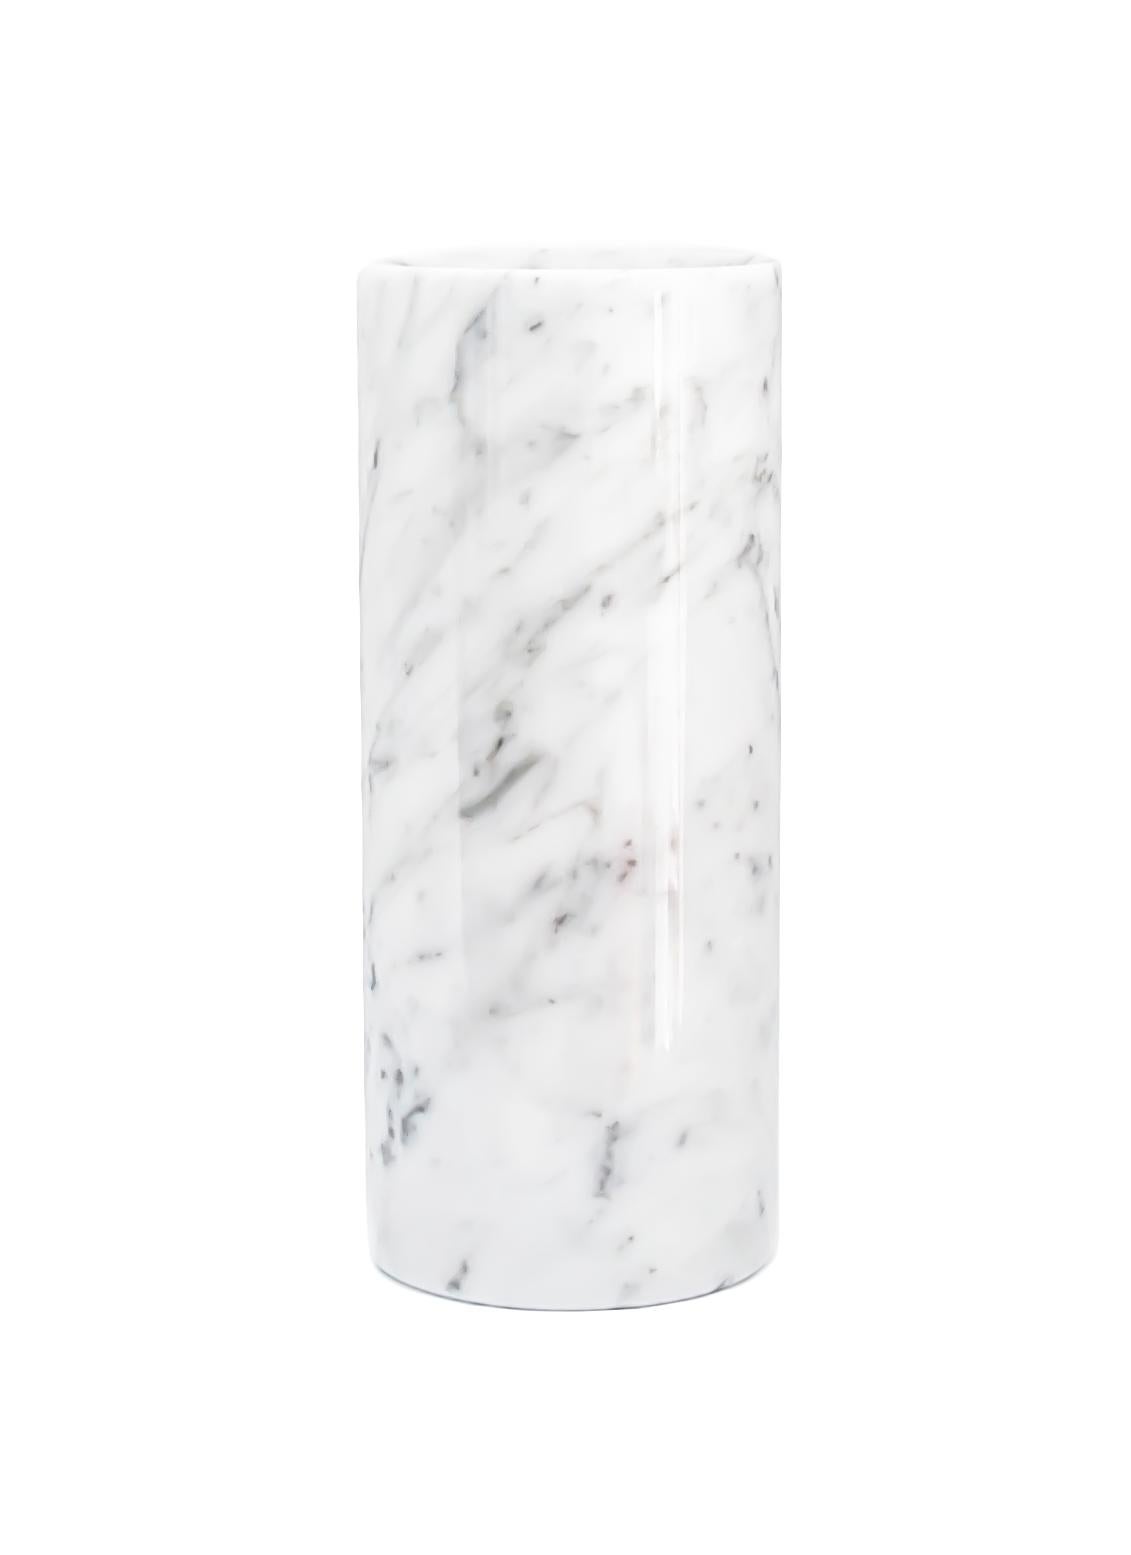 Cylindrical white Carrara marble vase made in Italy, Carrara.
Each piece is in a way unique (since each marble block is different in veins and shades) and handcrafted in Italy. Slight variations in shape, color and size are to be considered a